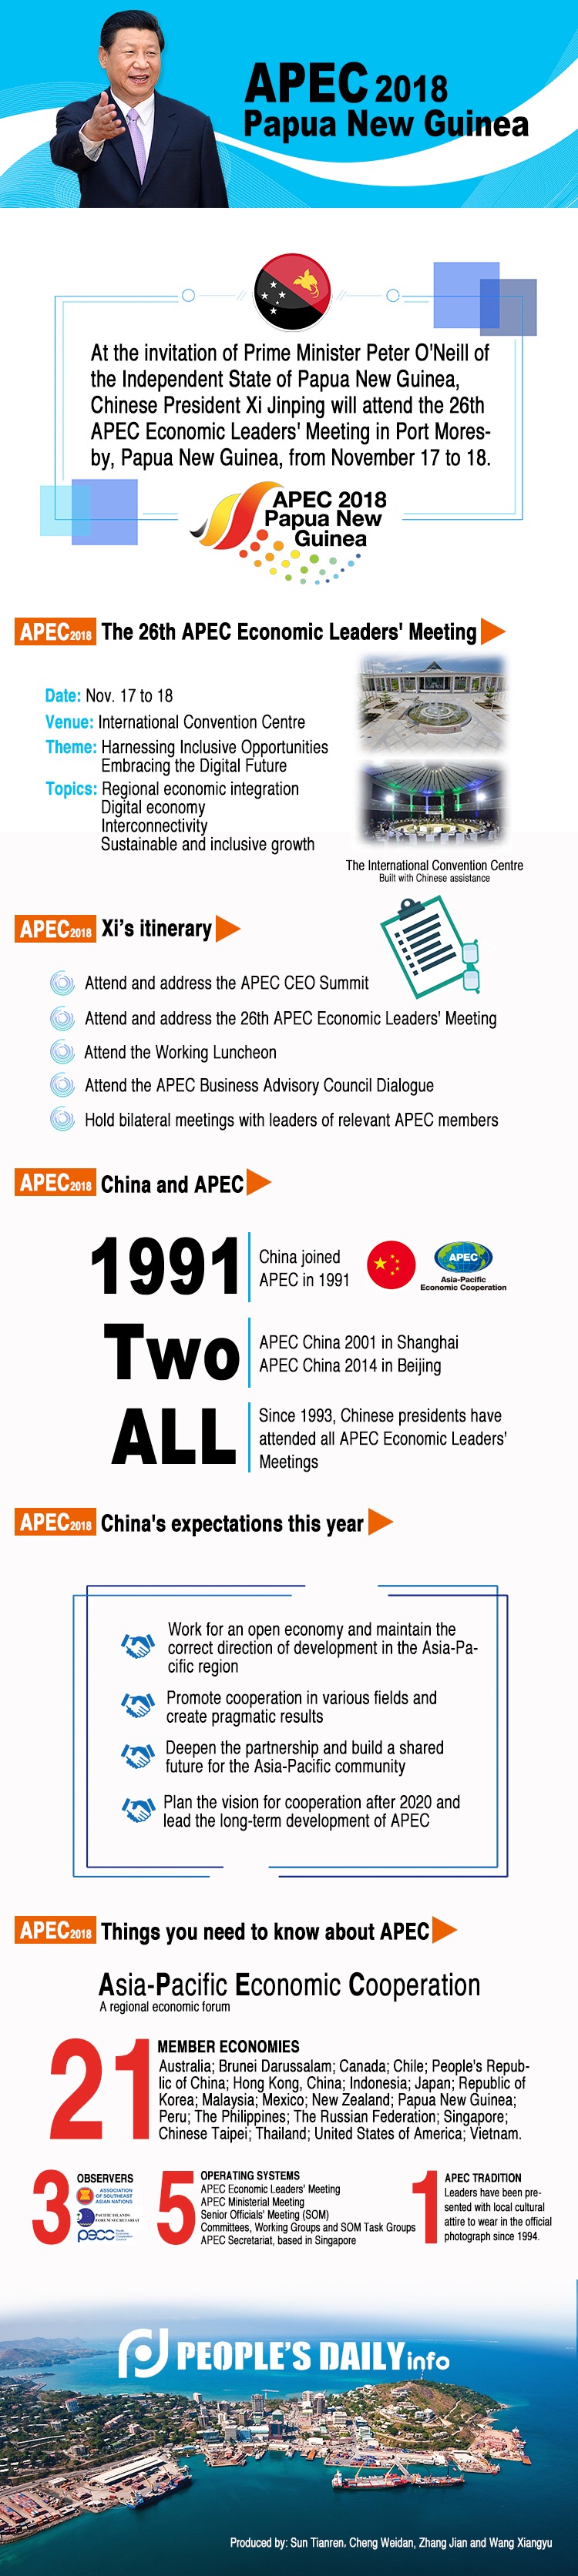 APEC 2018 things you need to know.jpg